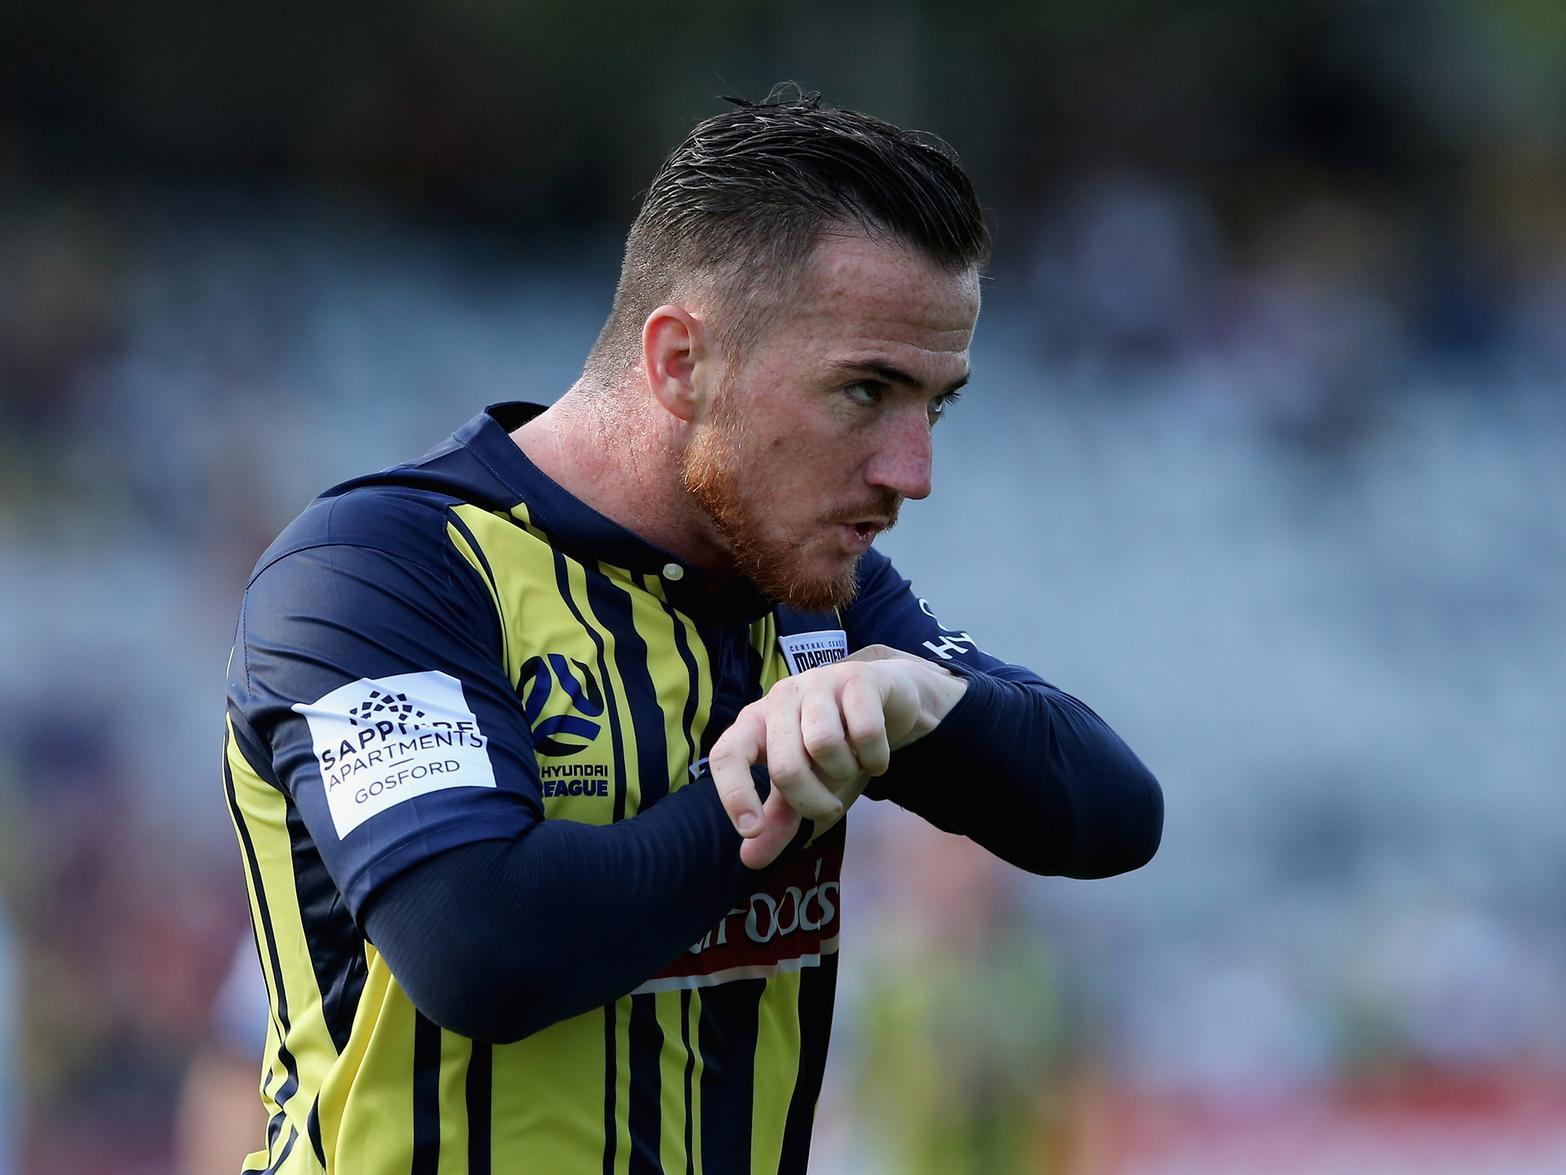 A target for Sunderland in their Championship days, McCormack remains a free agent. His wage demands could well prove a stumbling block for any League One side aiming to sign him, though.